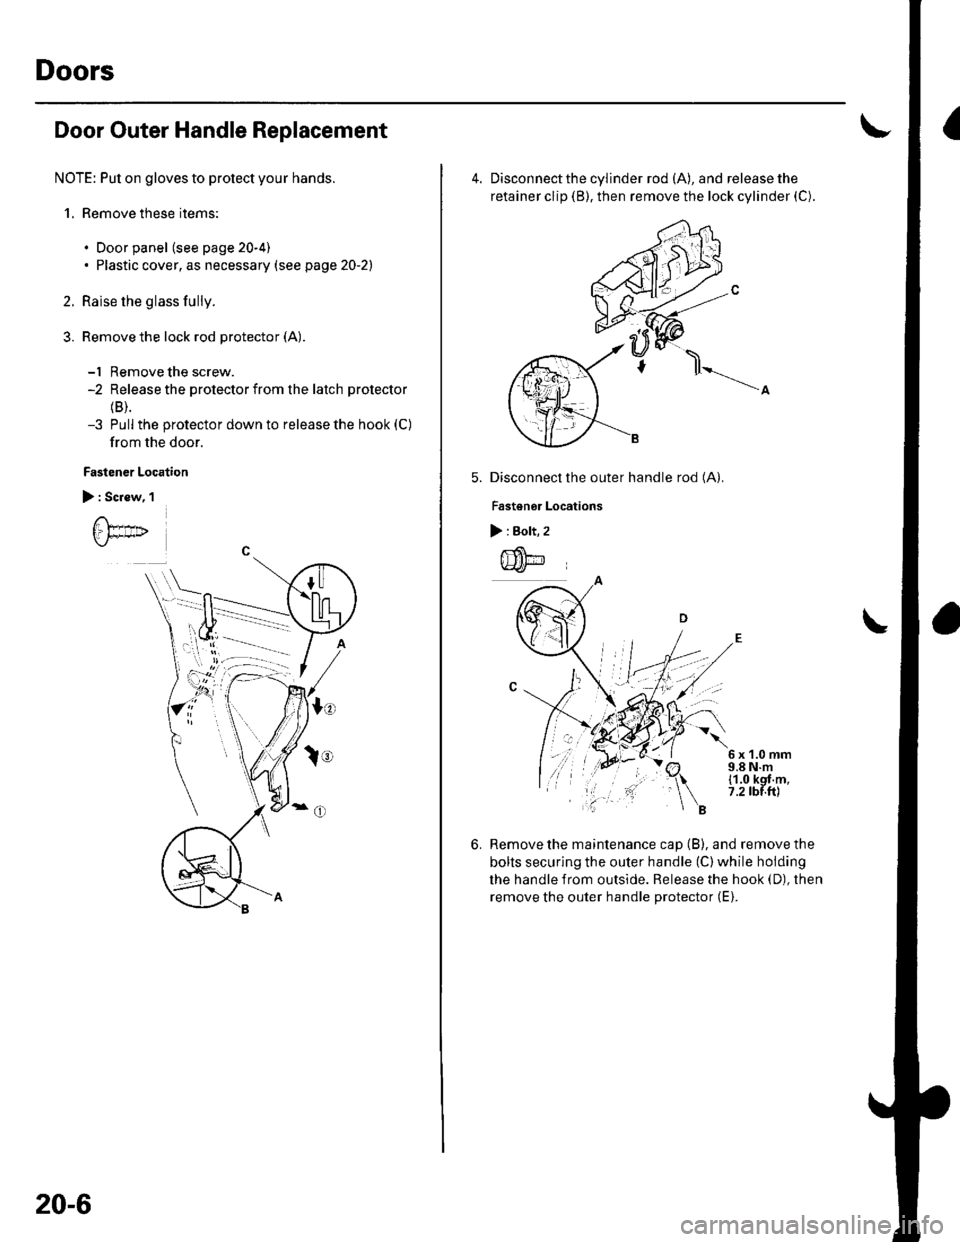 HONDA CIVIC 2003 7.G User Guide Doors
Door Outer Handle Replacement
NOTE: Put on gloves to protect your hands.
1, Remove these items:
. Door panel (see page 20-4). Plastic cover, as necessary (see page 20-2)
Raise the glass fully.
R